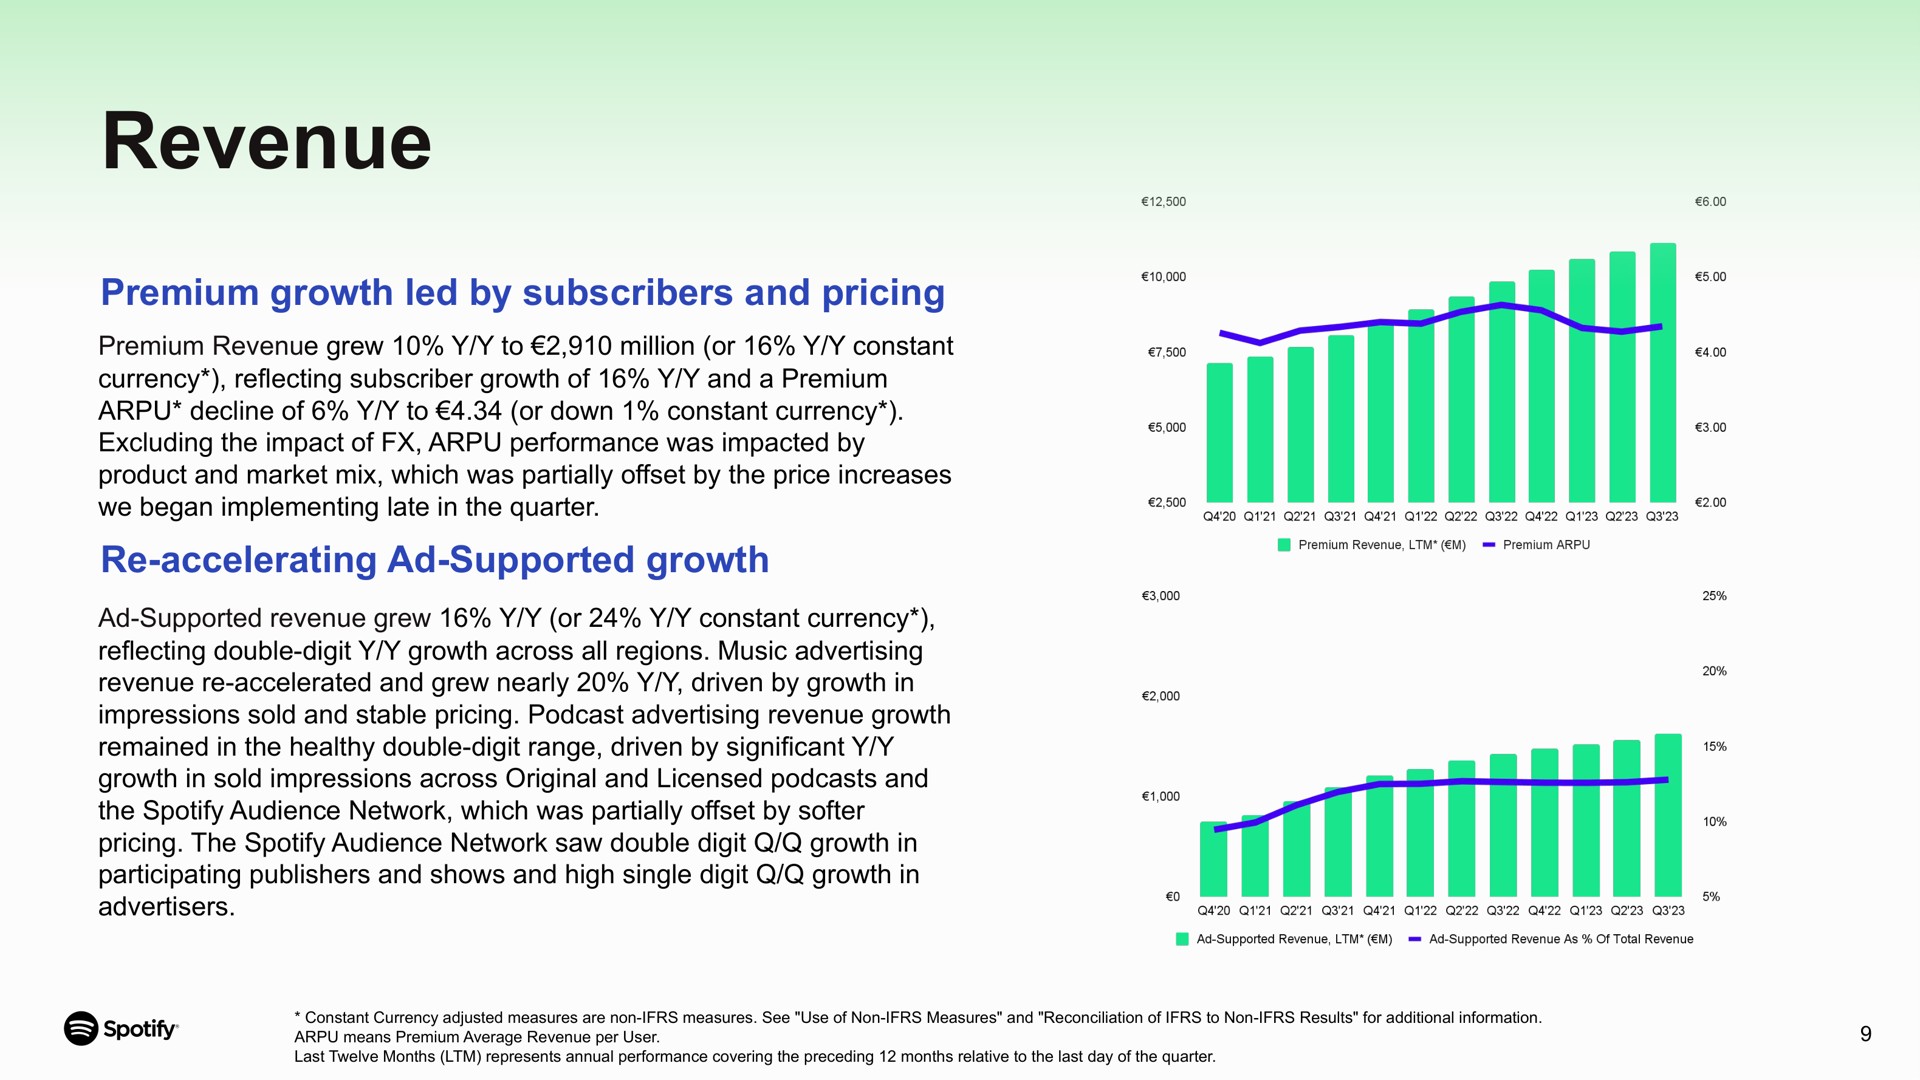 revenue premium growth led by subscribers and pricing accelerating supported growth | Spotify